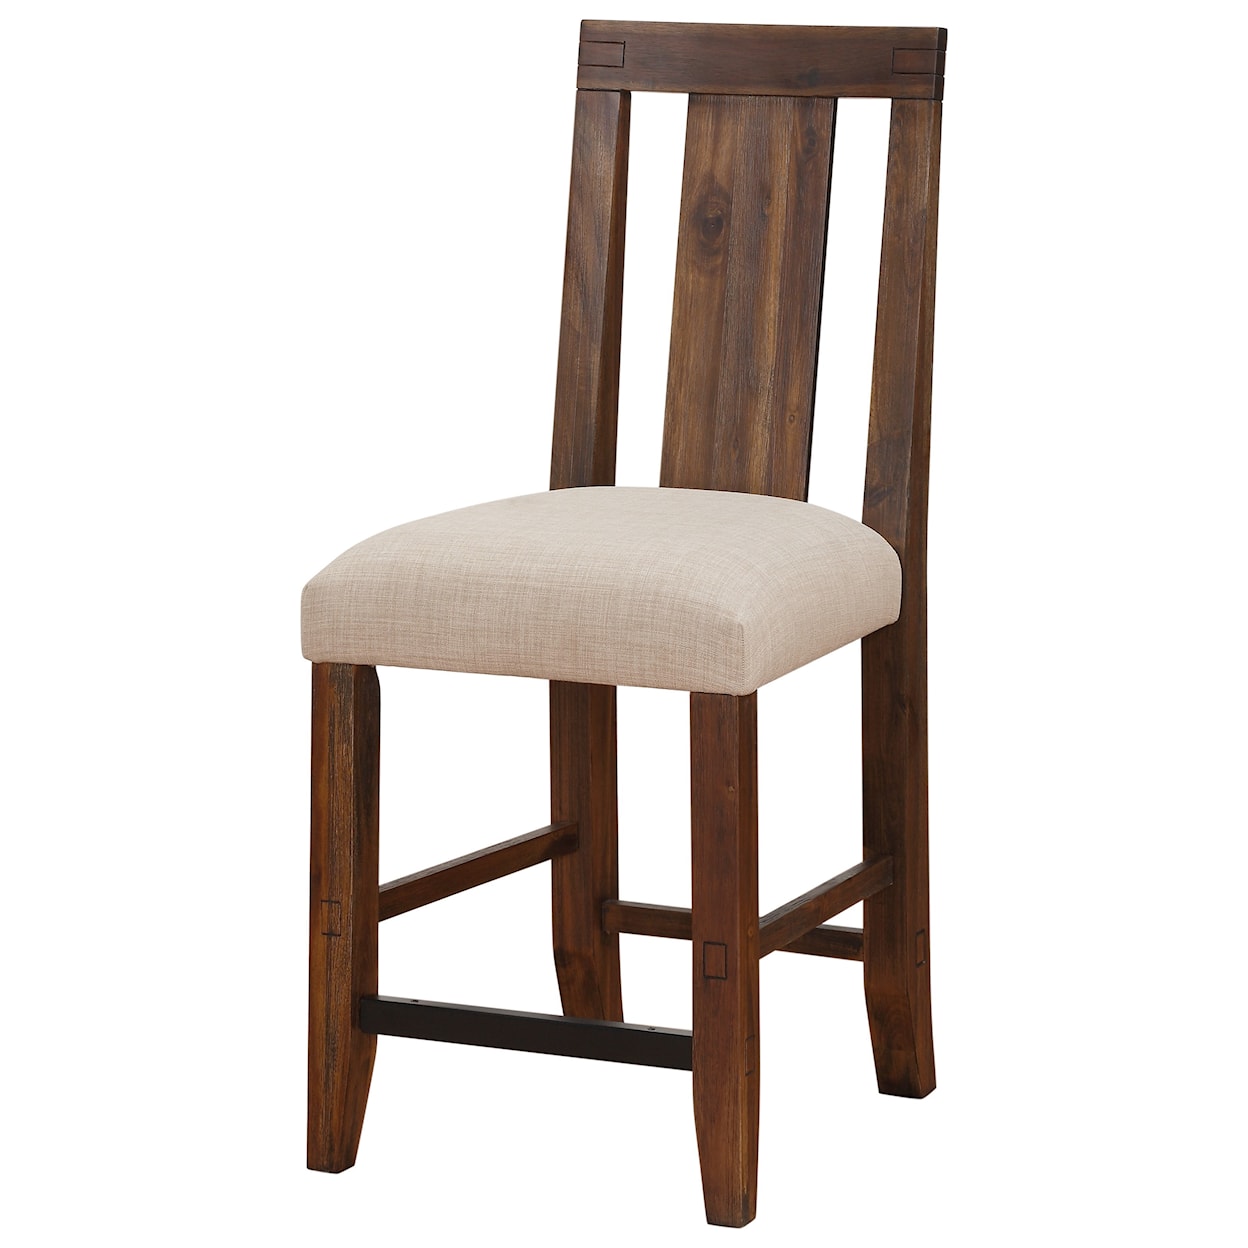 Modus International Meadow Solid Wood Upholstered Counter Stool